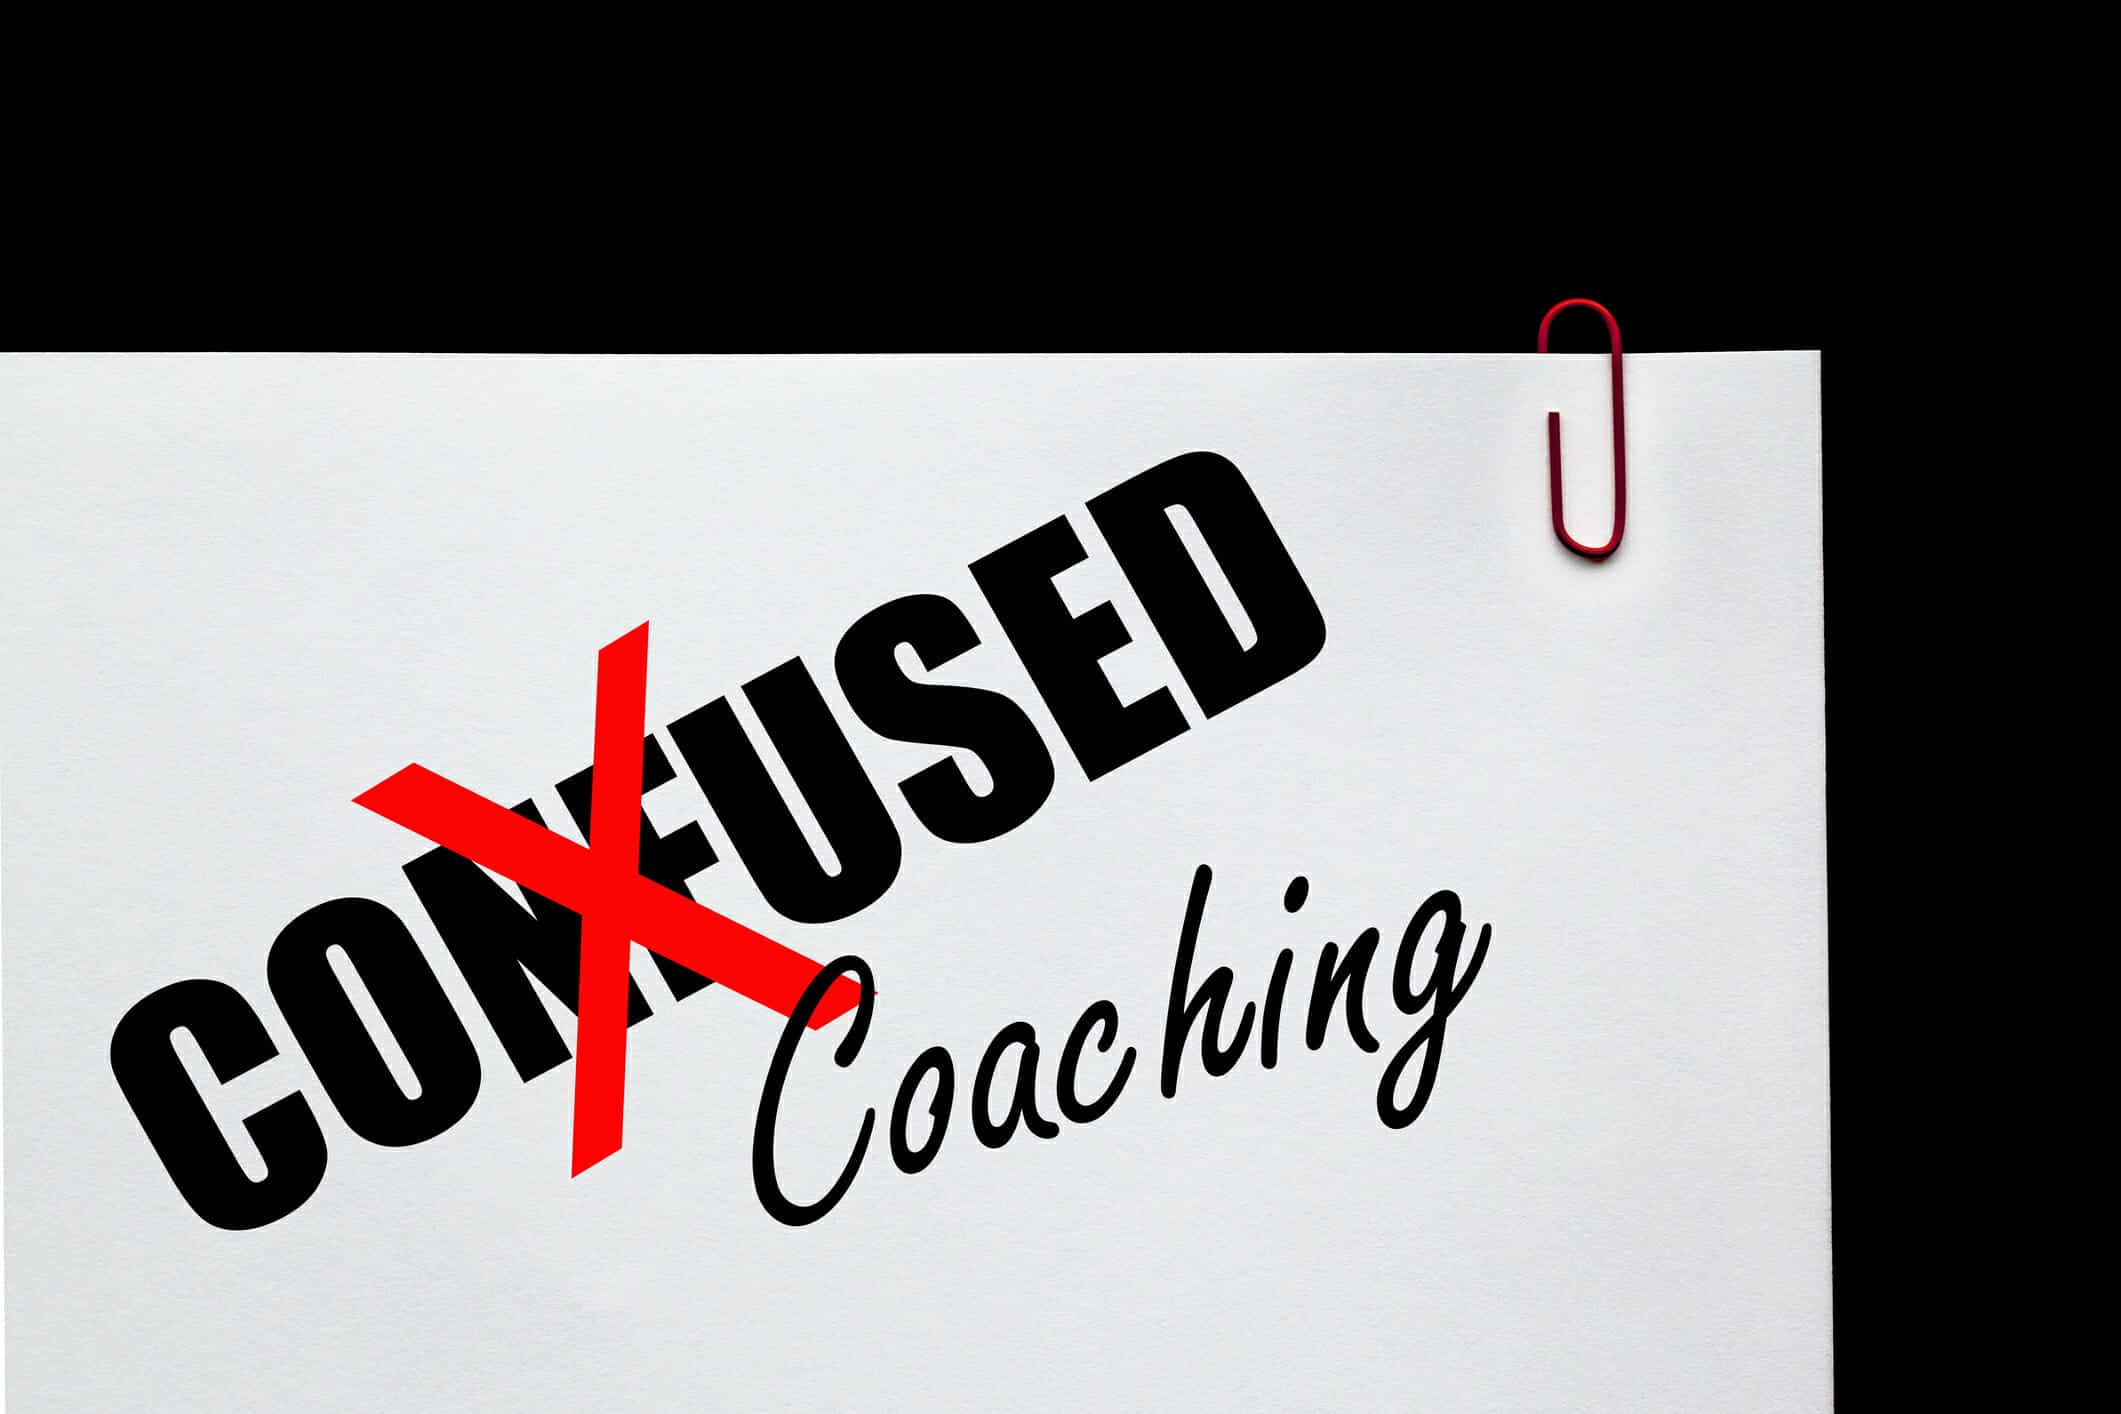 Word "Confused" with a red "X" on it, and the word "Coaching" written below